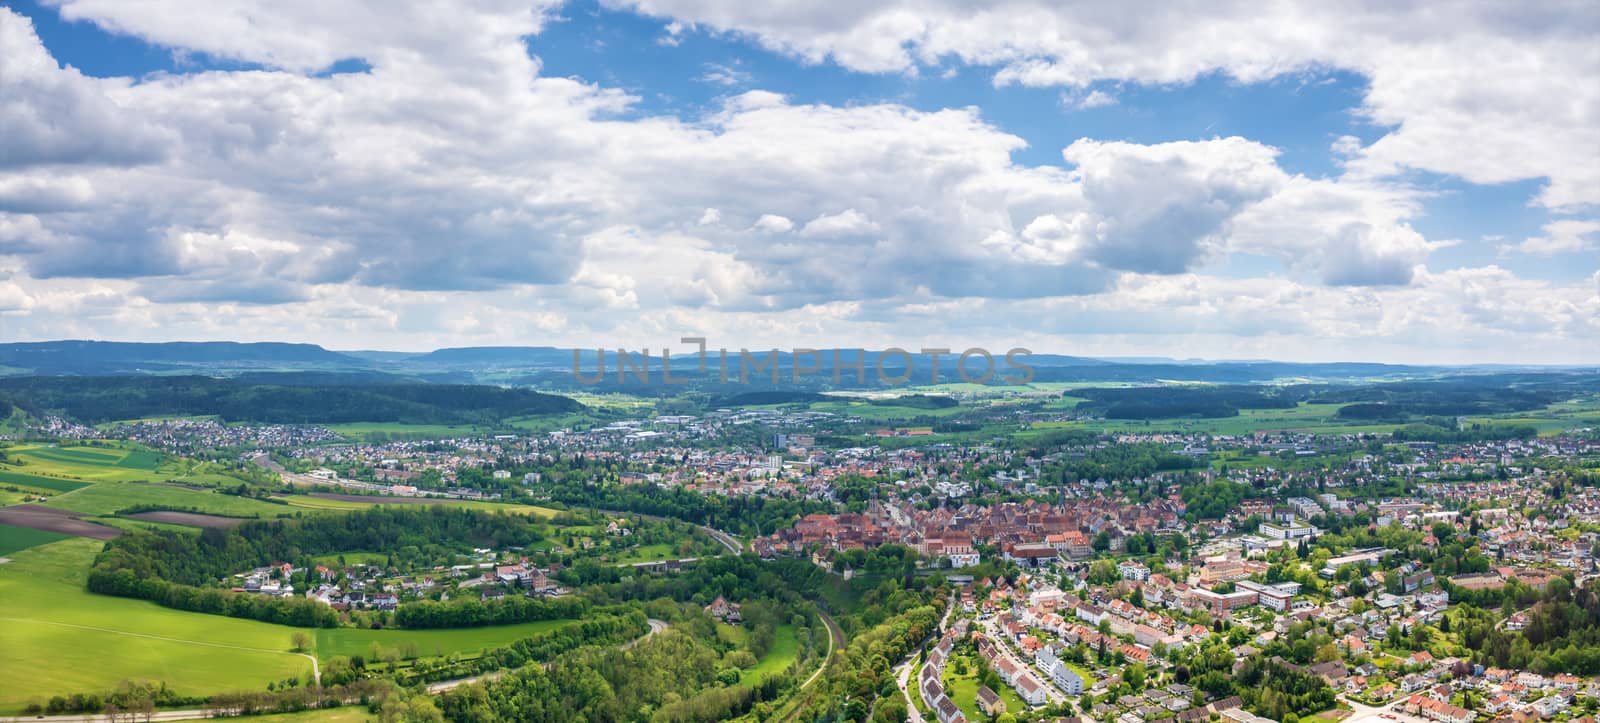 An image of a panoramic view at Rottweil Germany